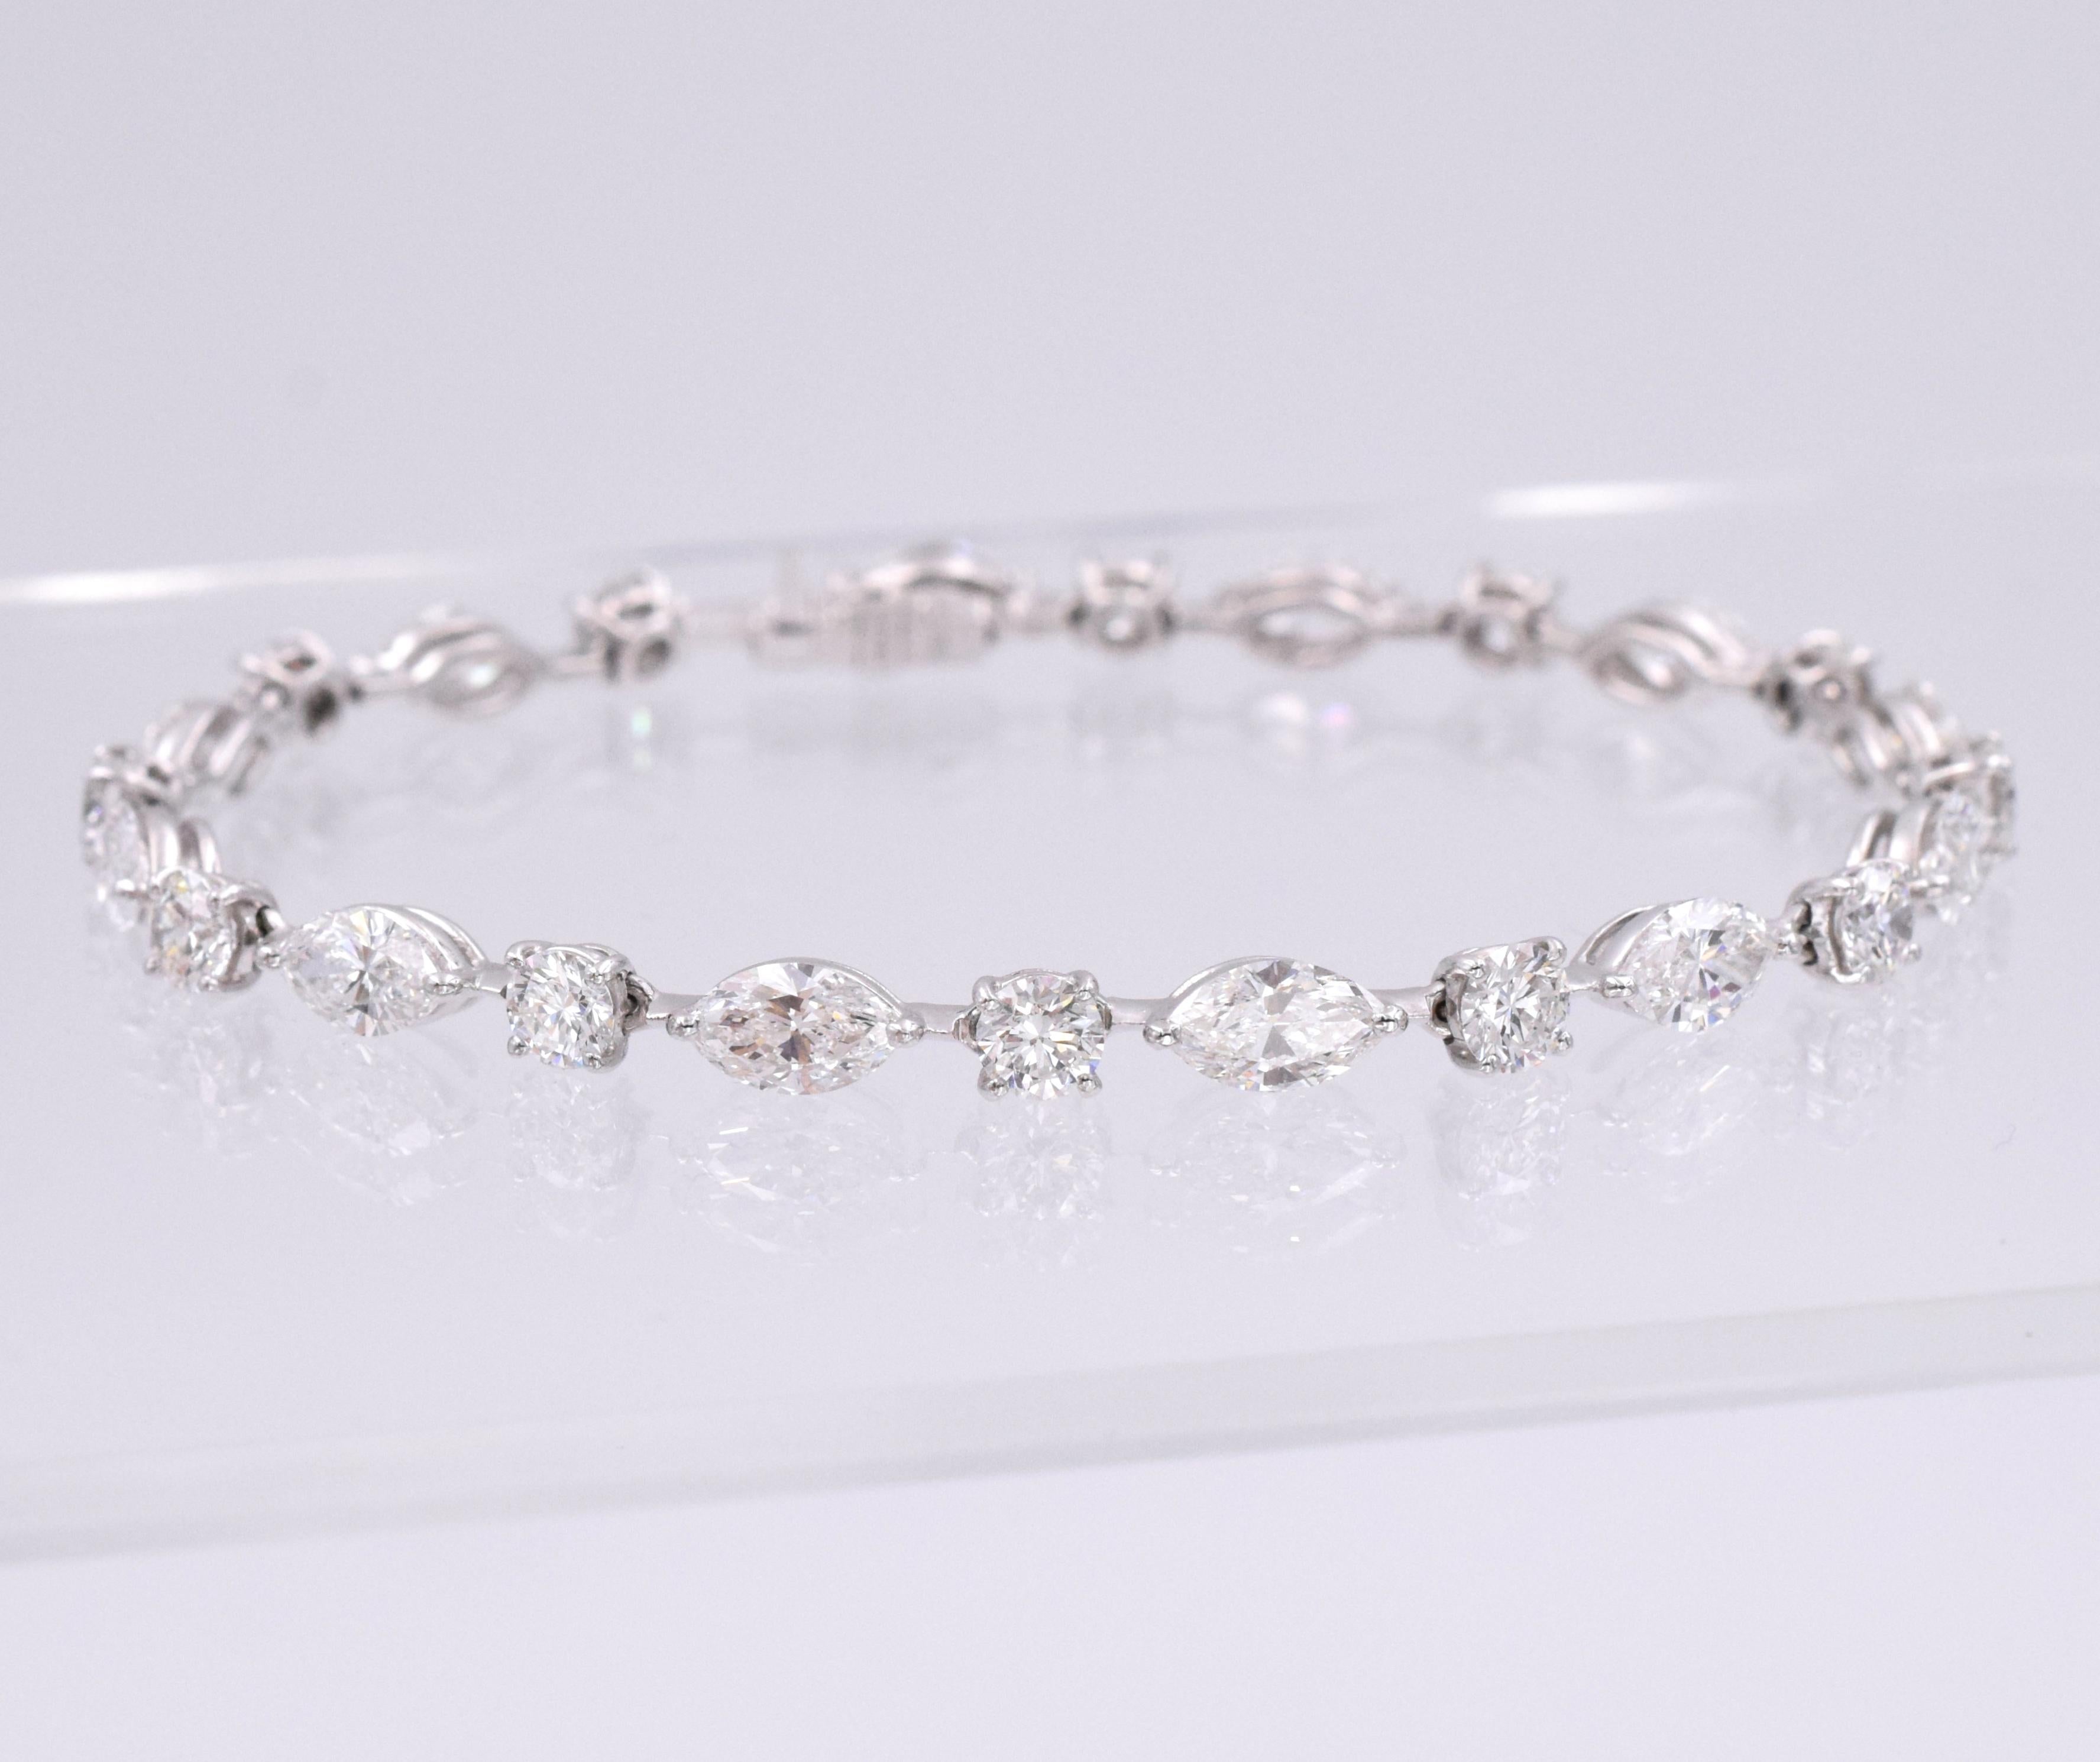 Graff Diamond Bracelet. This bracelet has 24 round and marquise shape diamonds with a total of approximately 10carats, set in 18k white gold. 
12 Marquise shape diamonds app 7 carats ( 0.60 carats each)
12 round shape diamonds app 3 carats (